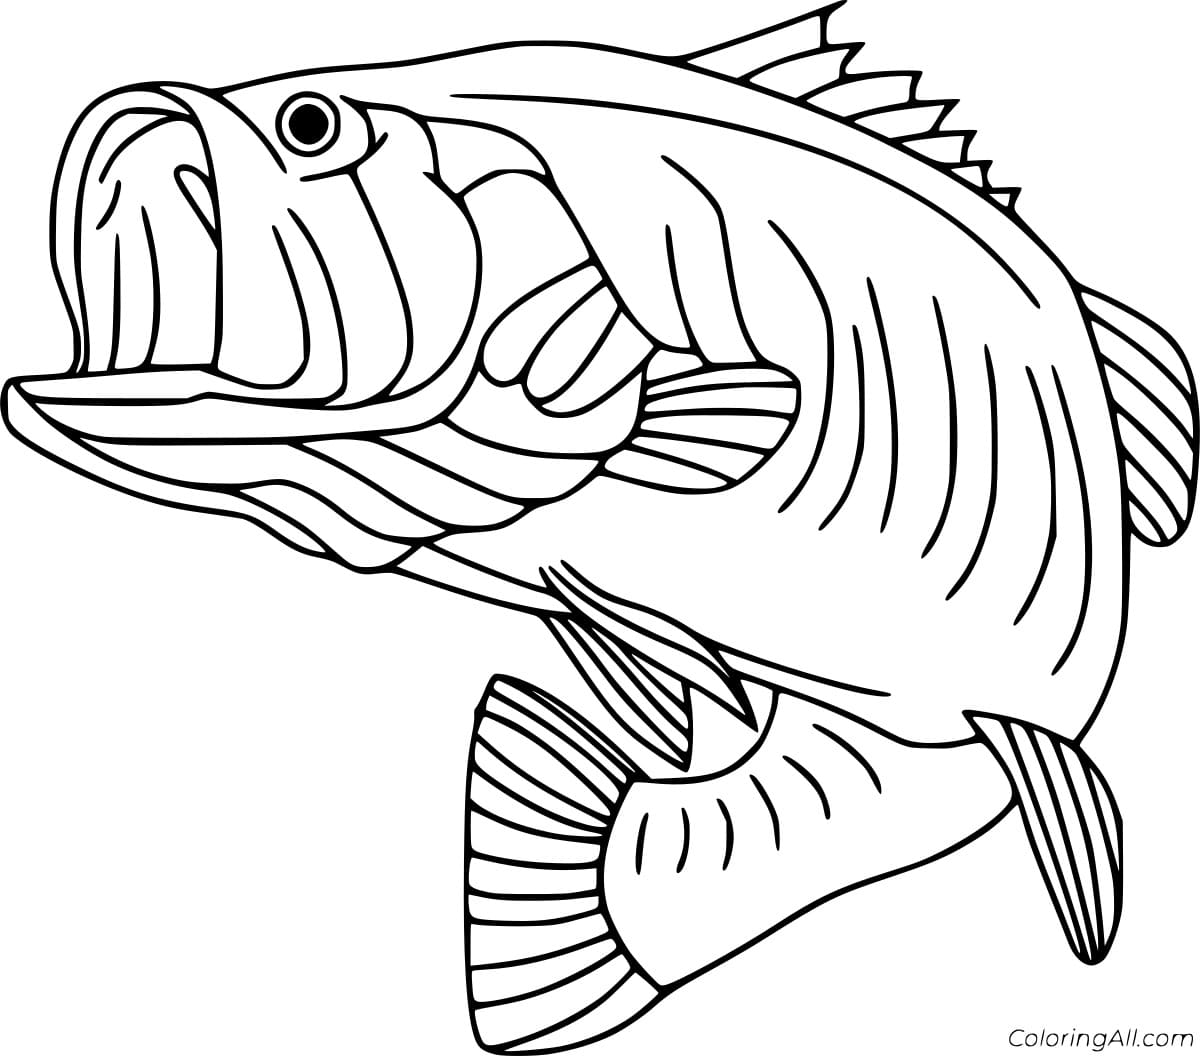 White Bass Image Coloring Page